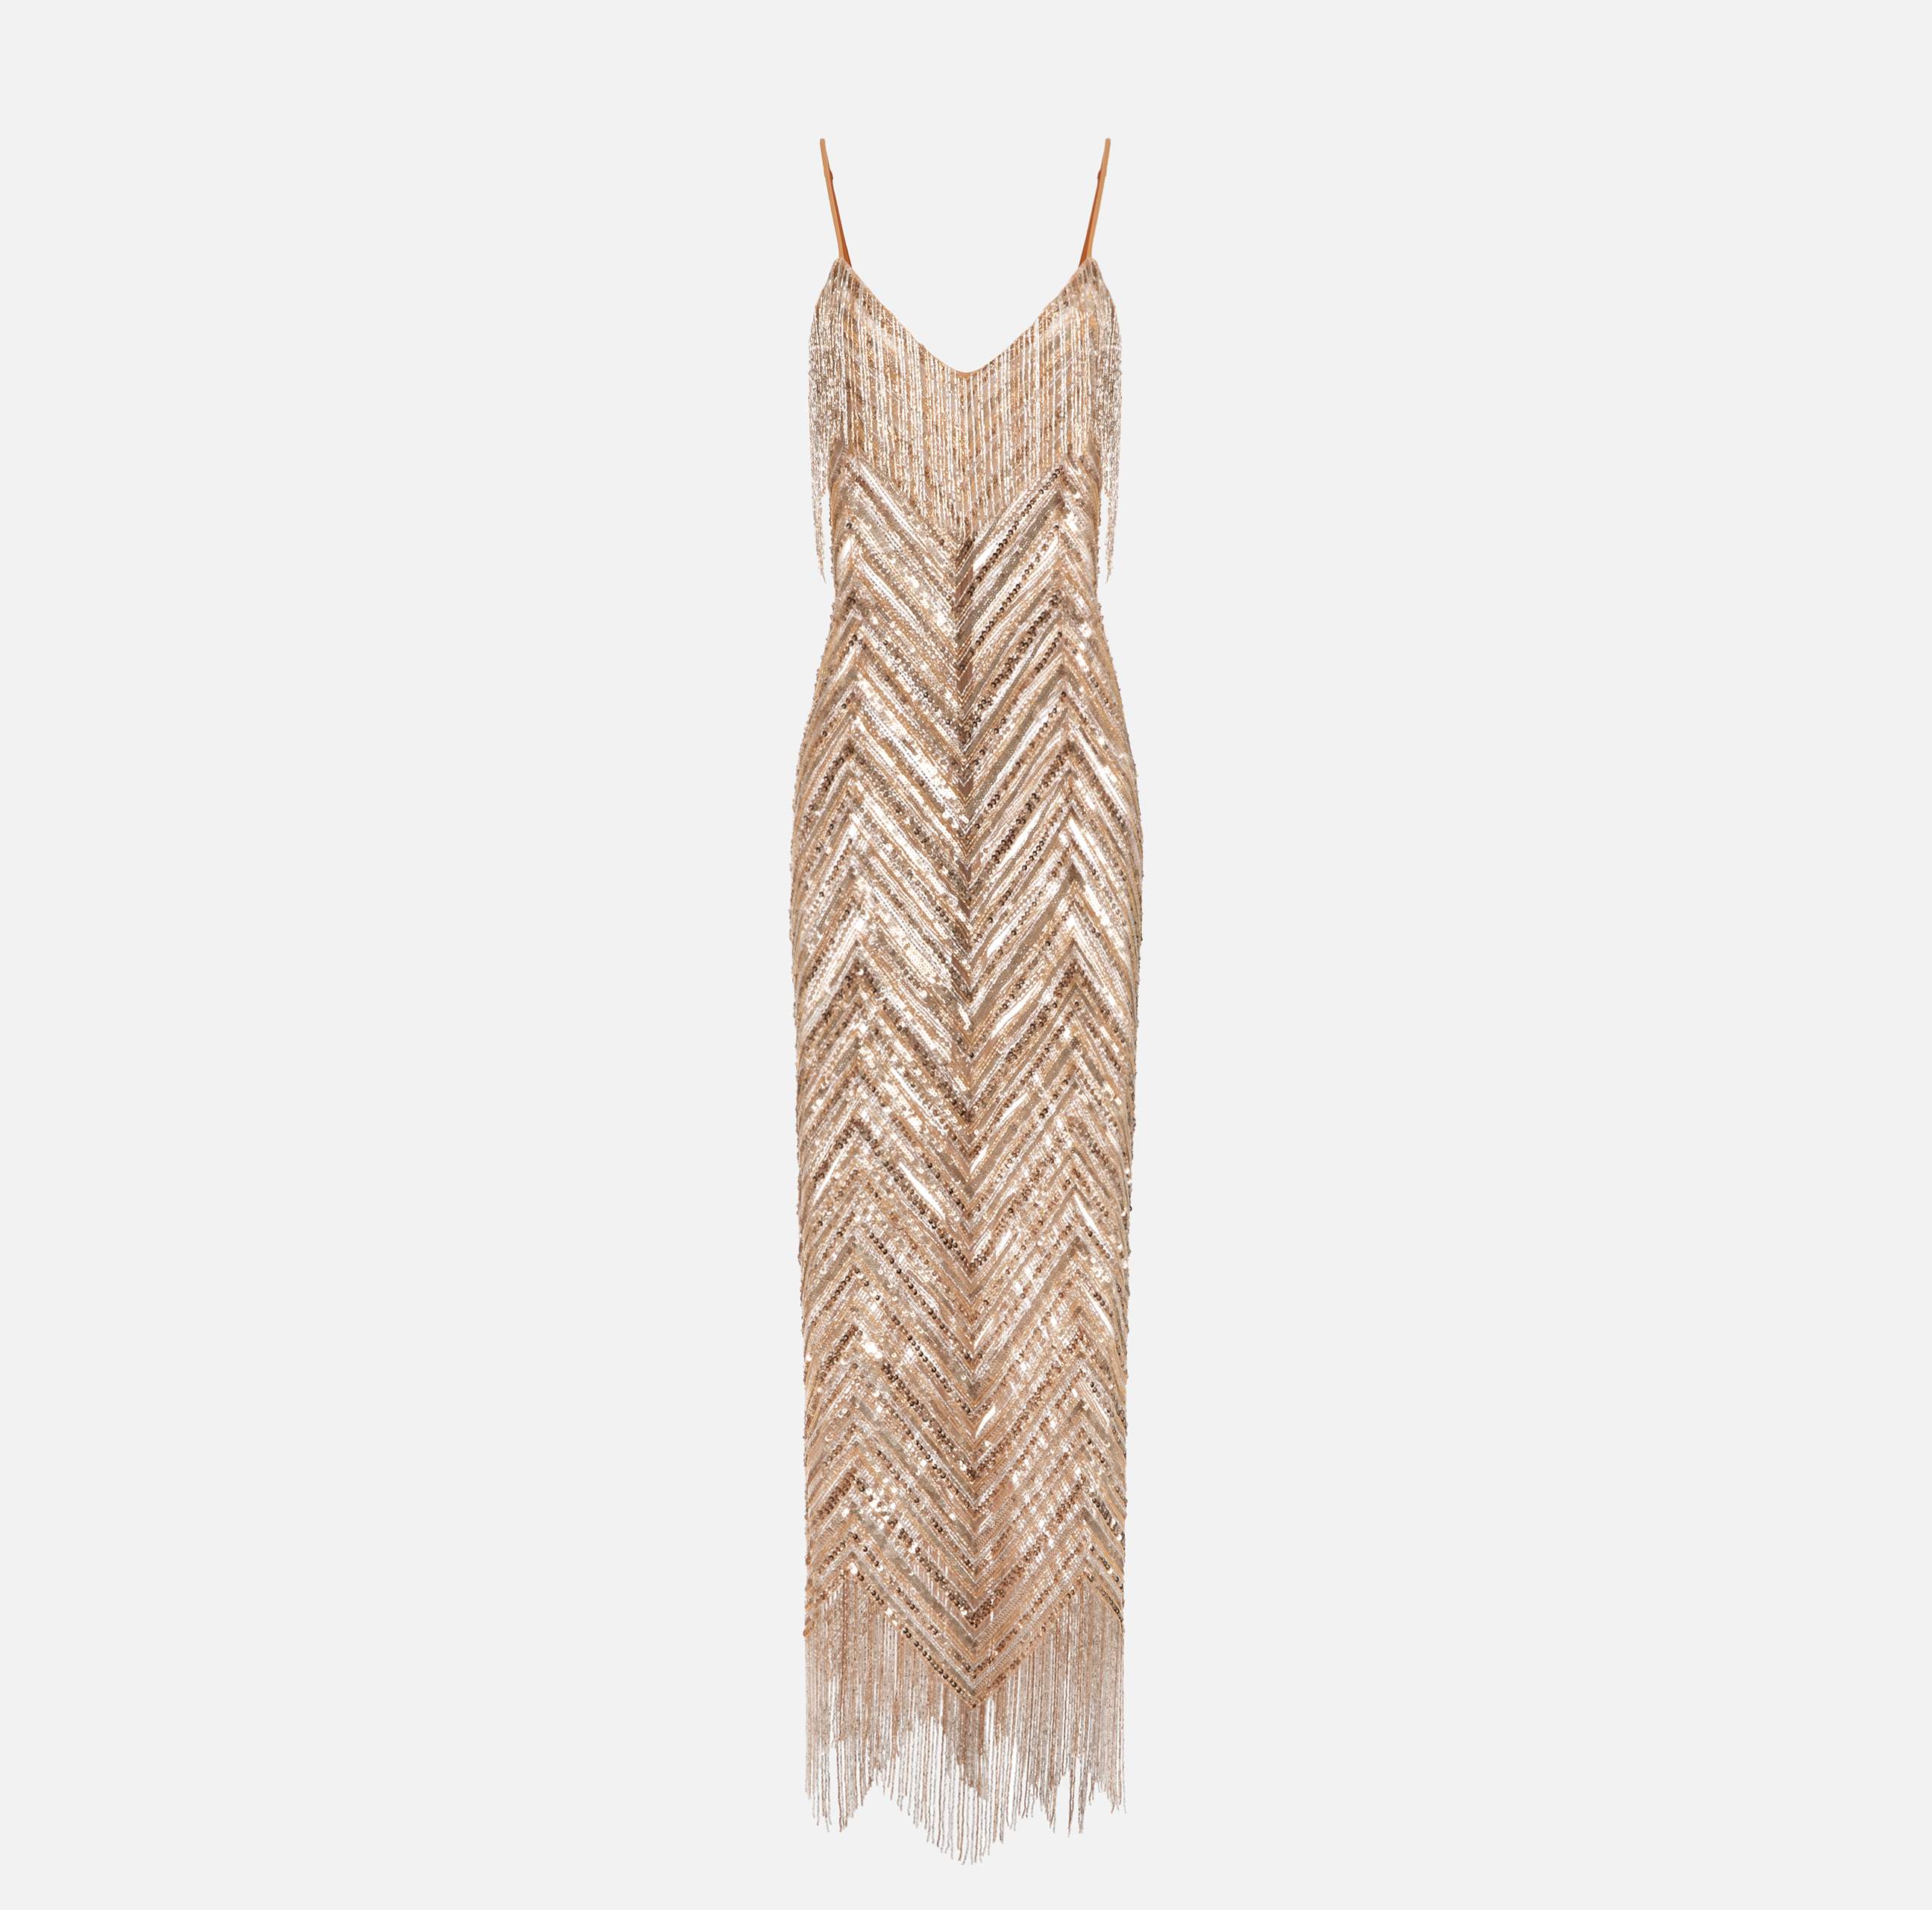 Tulle Red Carpet dress with embroidered sequins - ABBIGLIAMENTO - Elisabetta Franchi